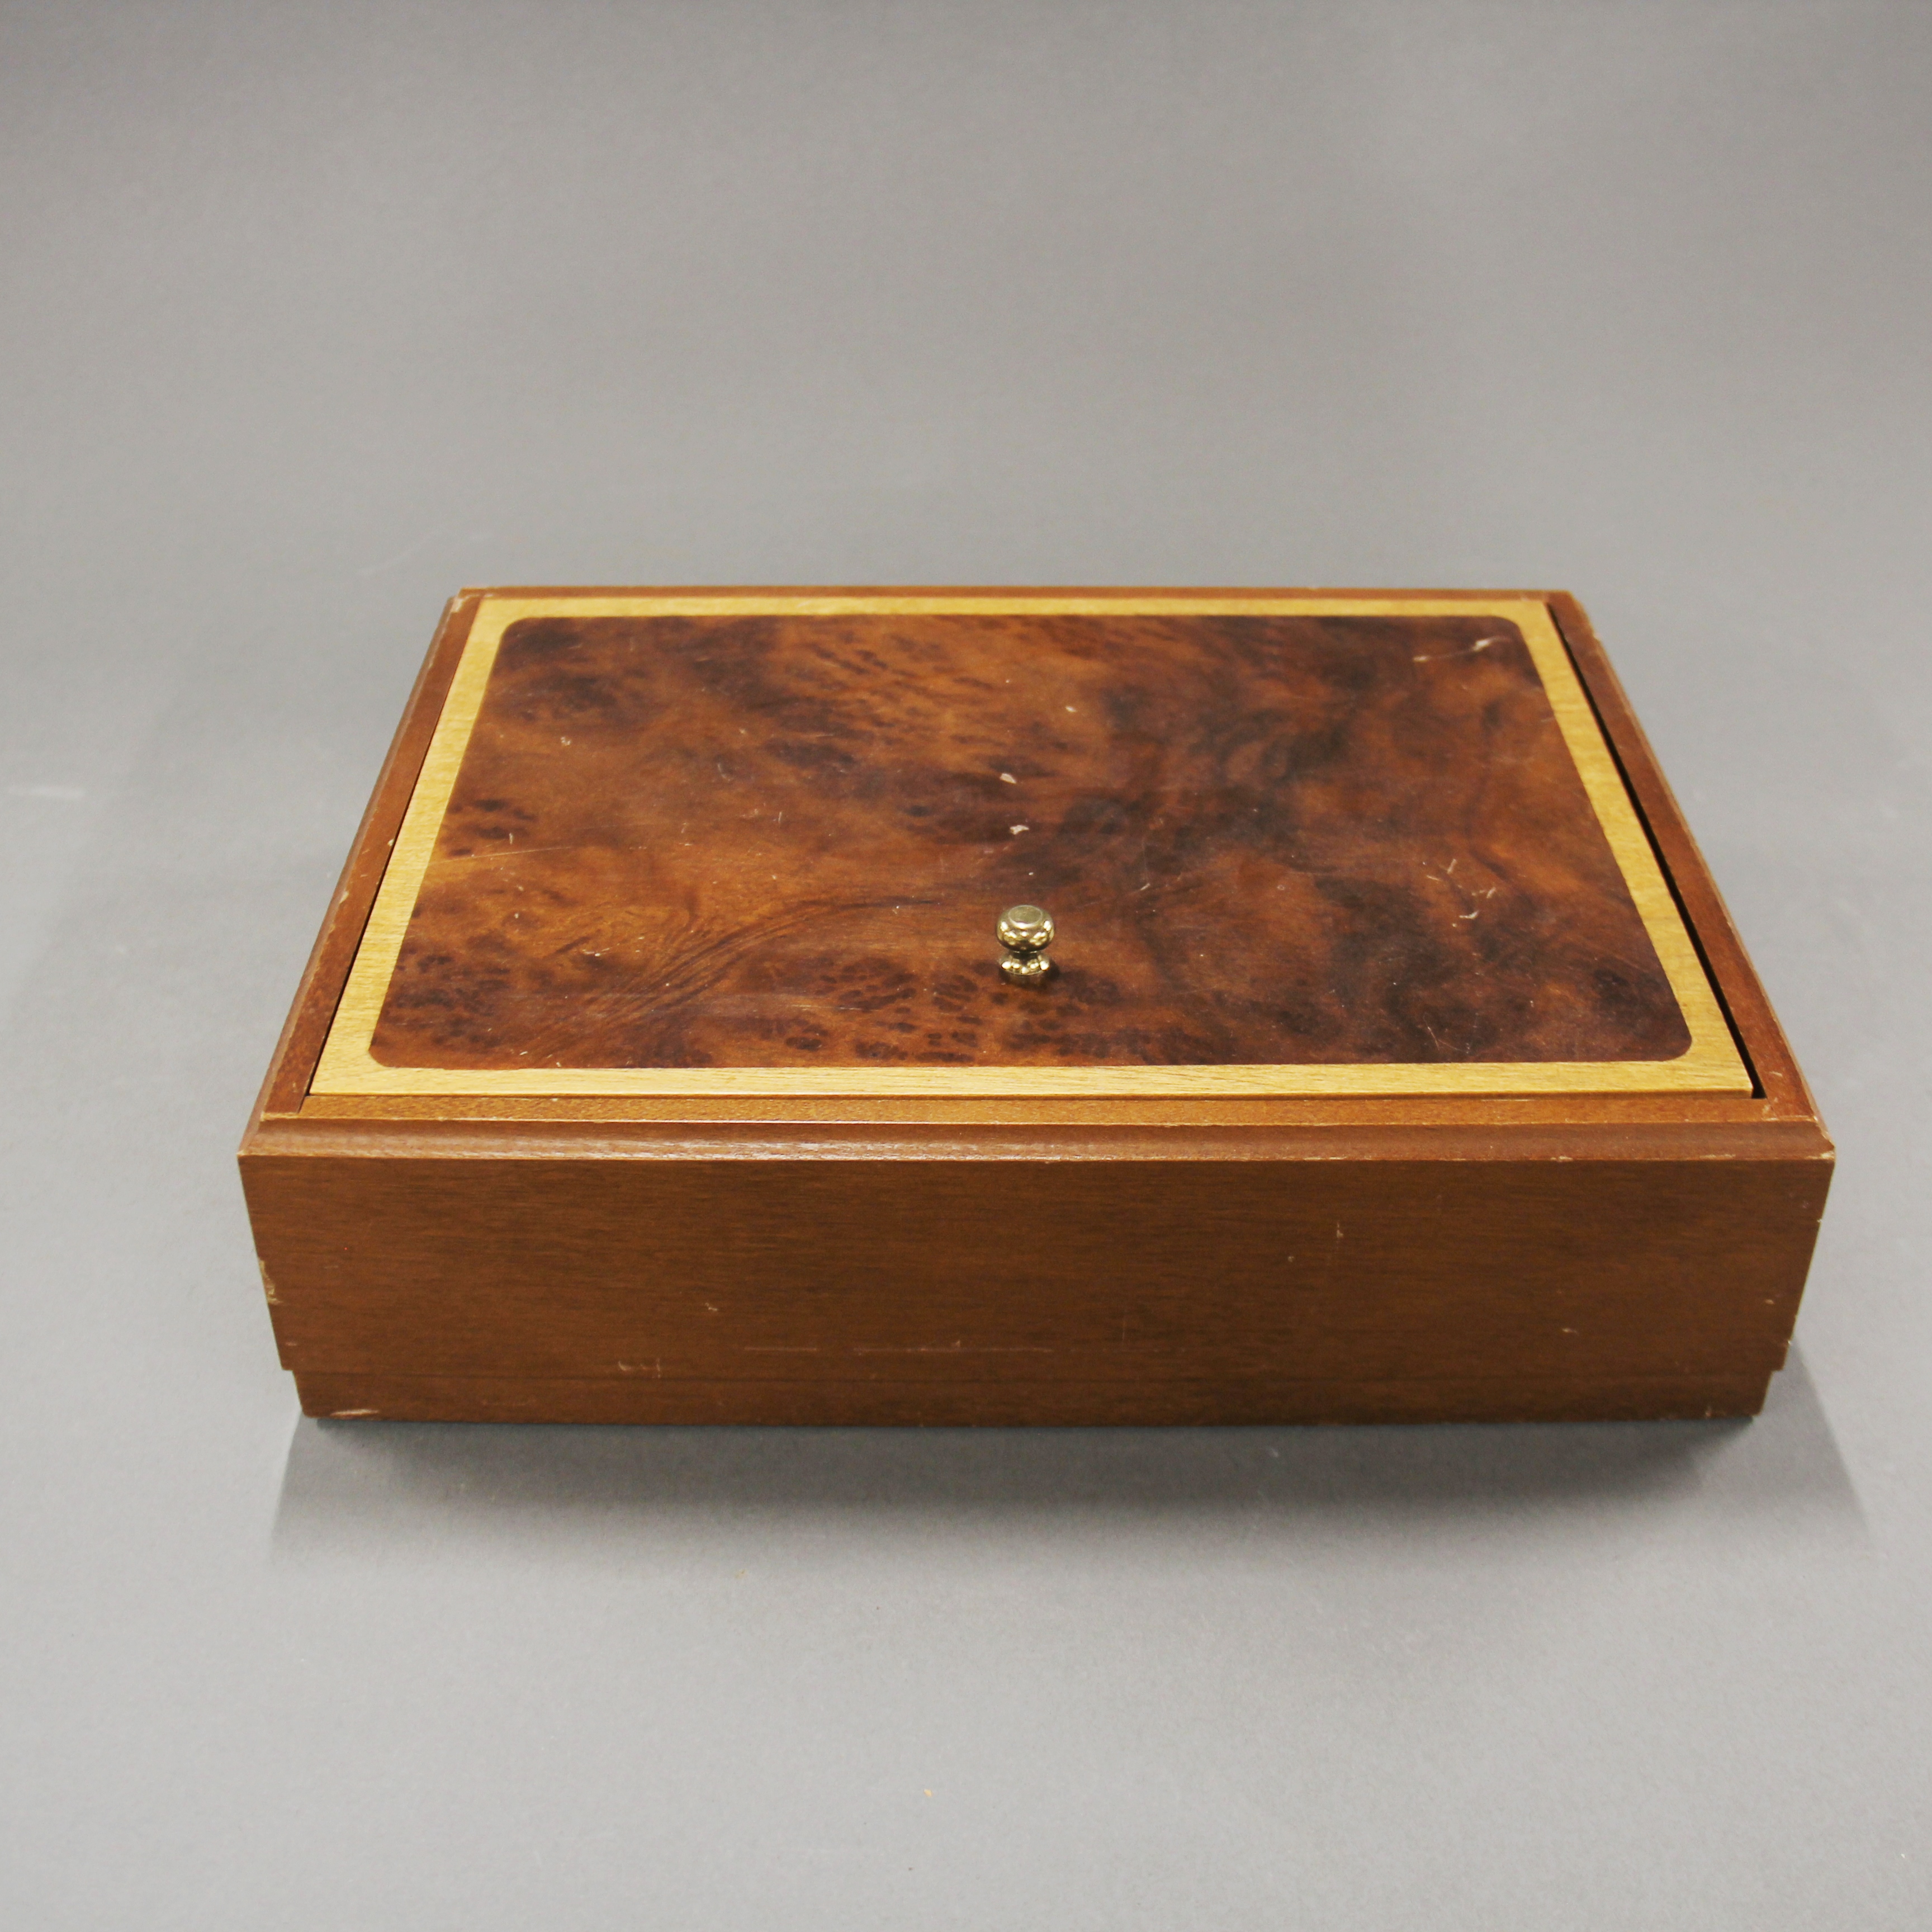 A wooden table game known as 'The Captain's Mistress', box size 29 x 23 x 8cm. - Image 3 of 3